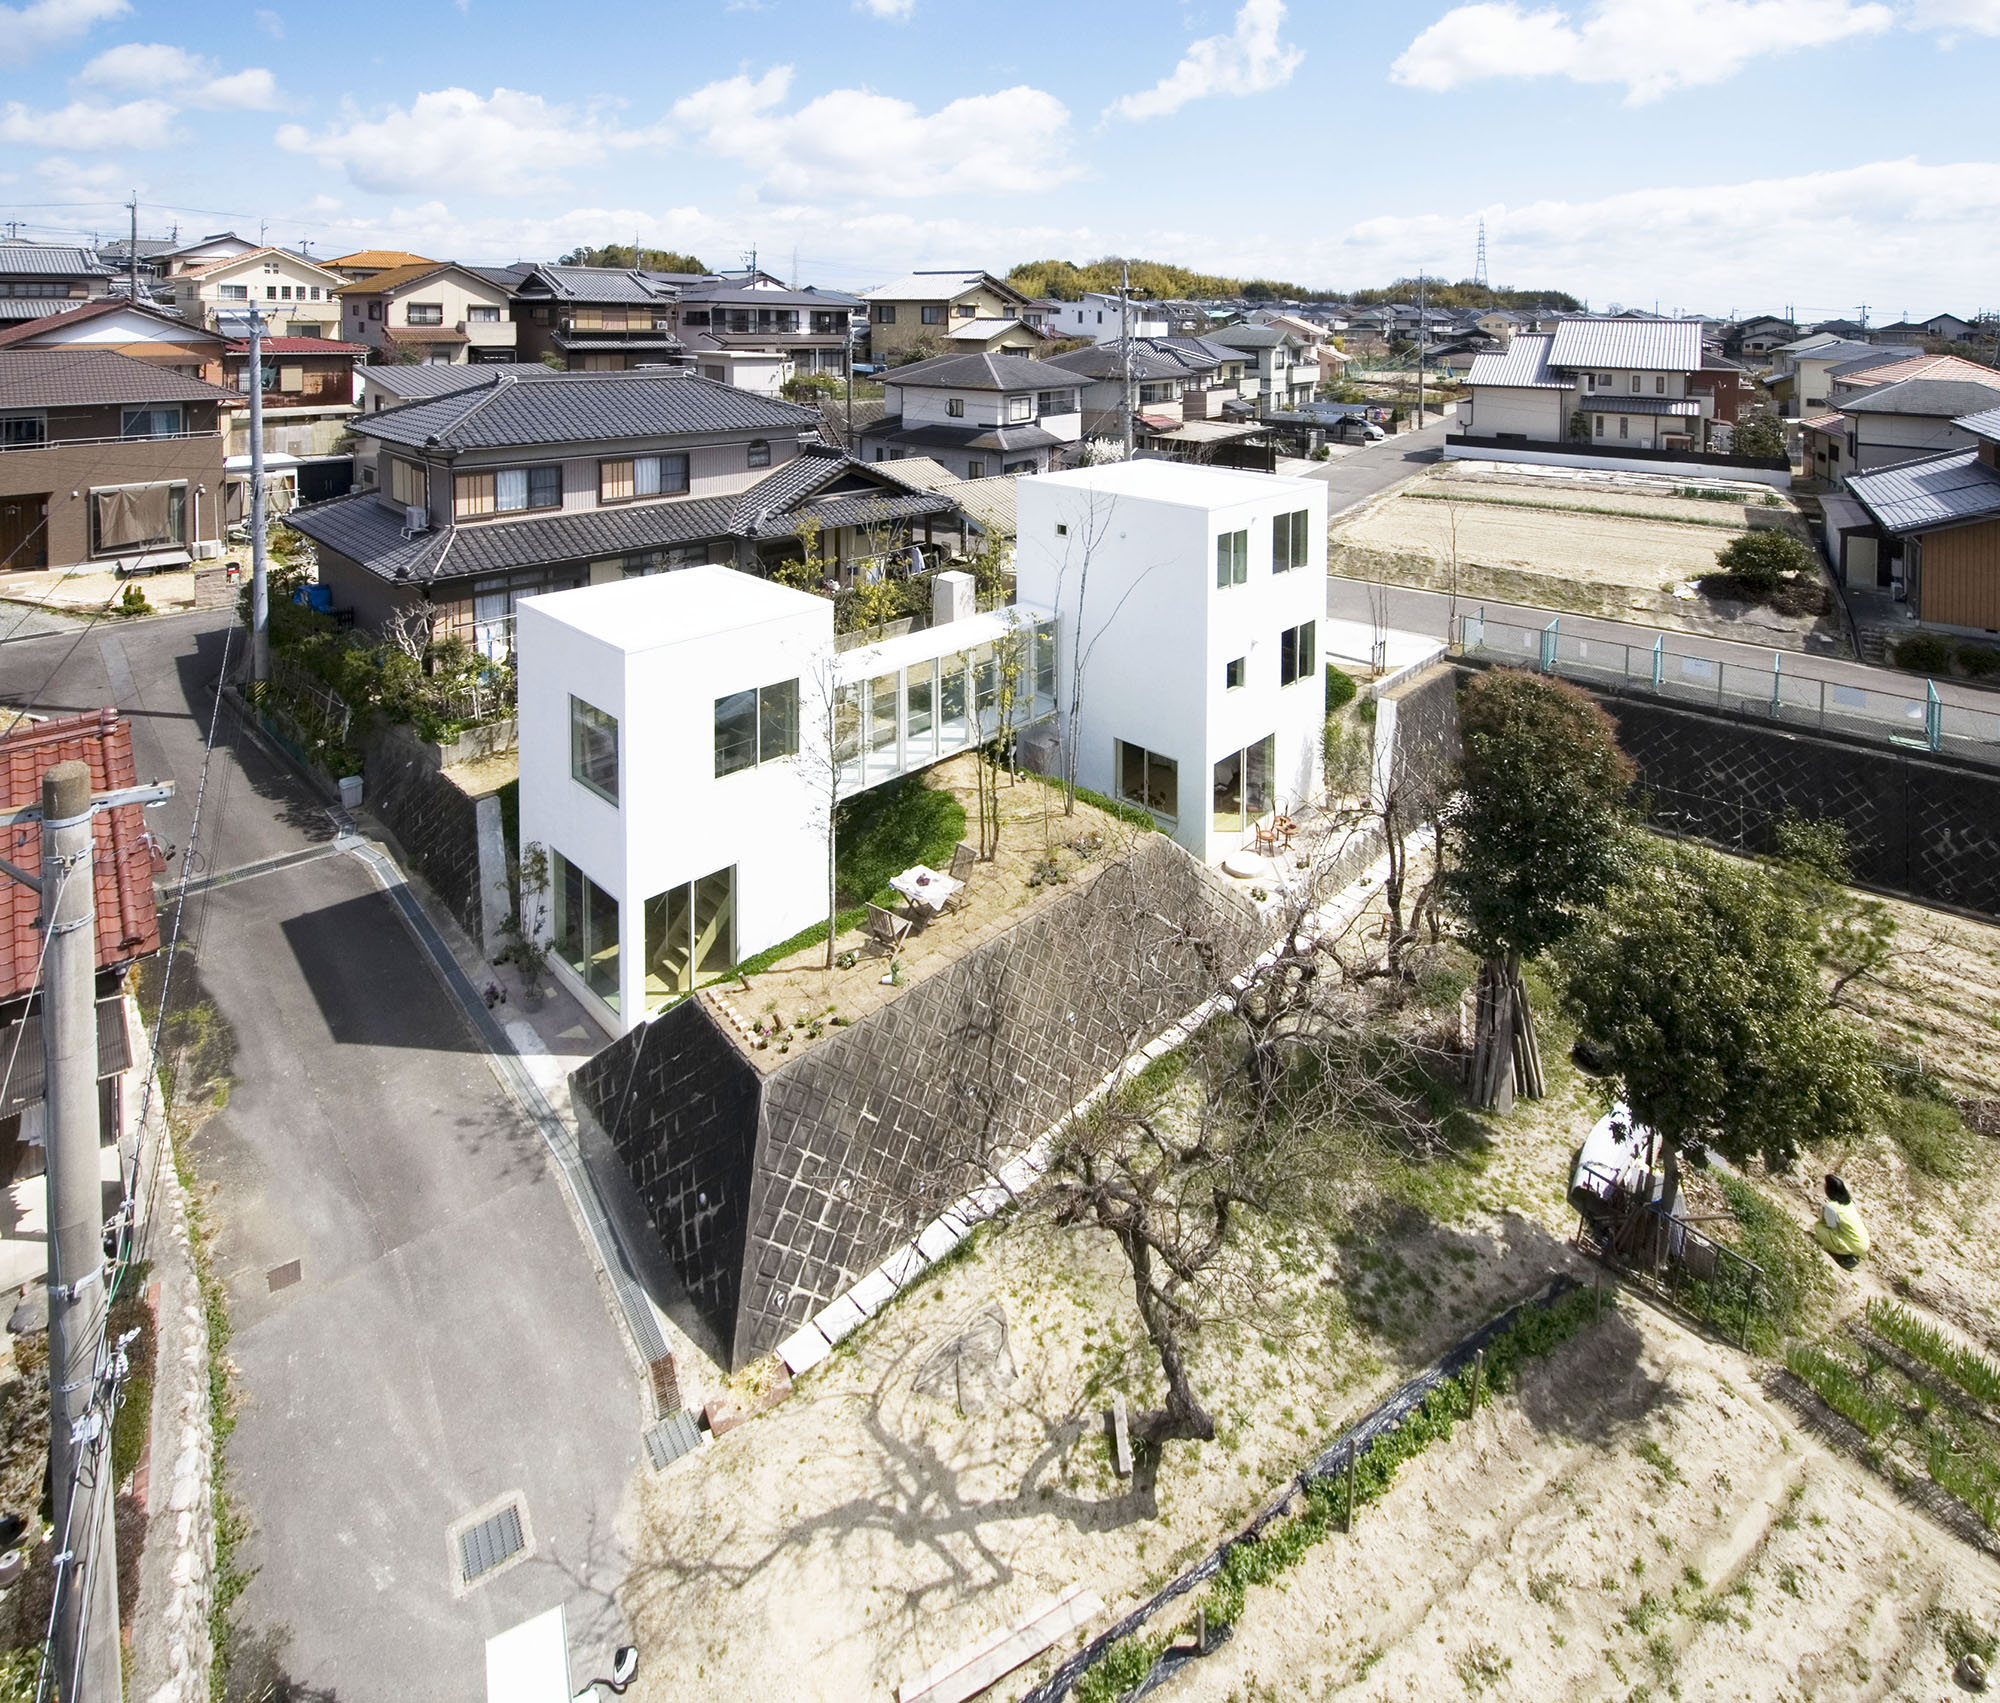 House Connecting the Town by Studio Velocity